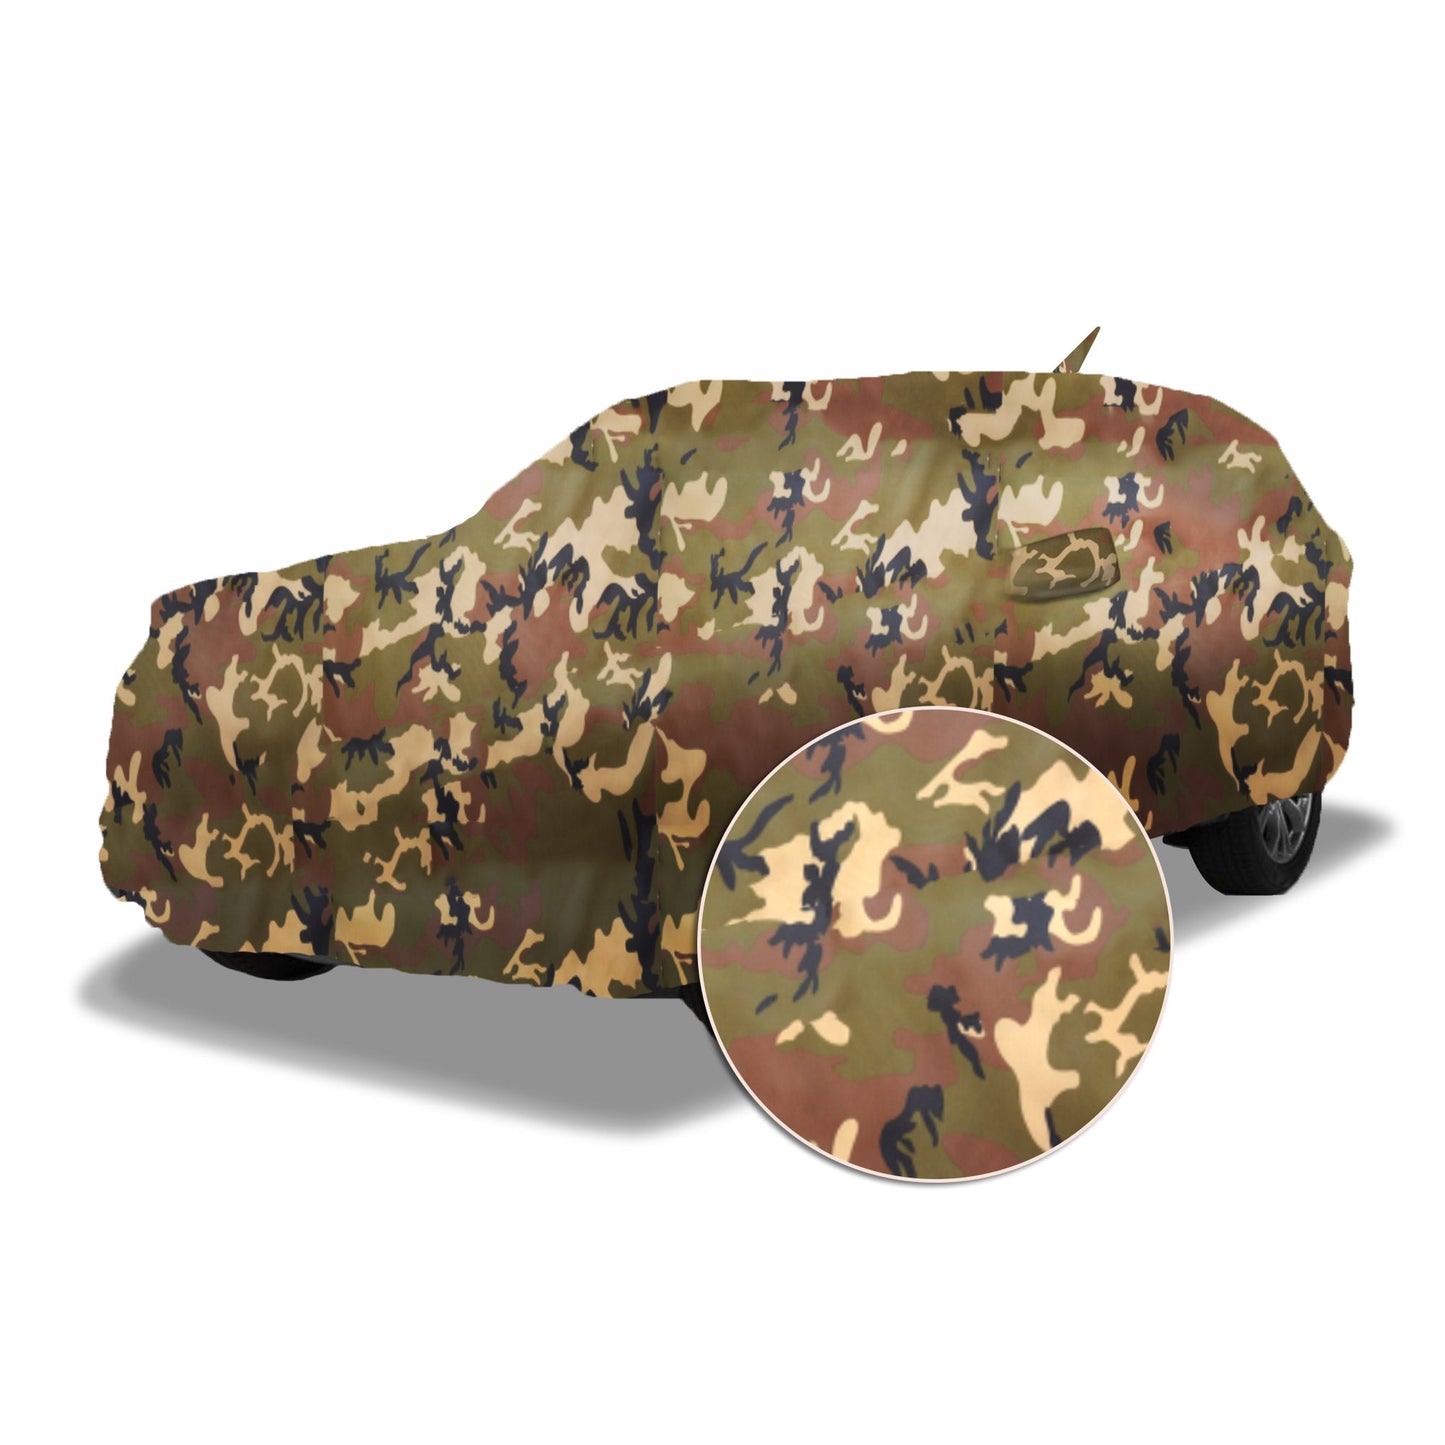 Ascot Honda WRV Car Body Cover Extra Strong & Dust Proof Jungle Military Car Cover with UV Proof & Water-Resistant Coating